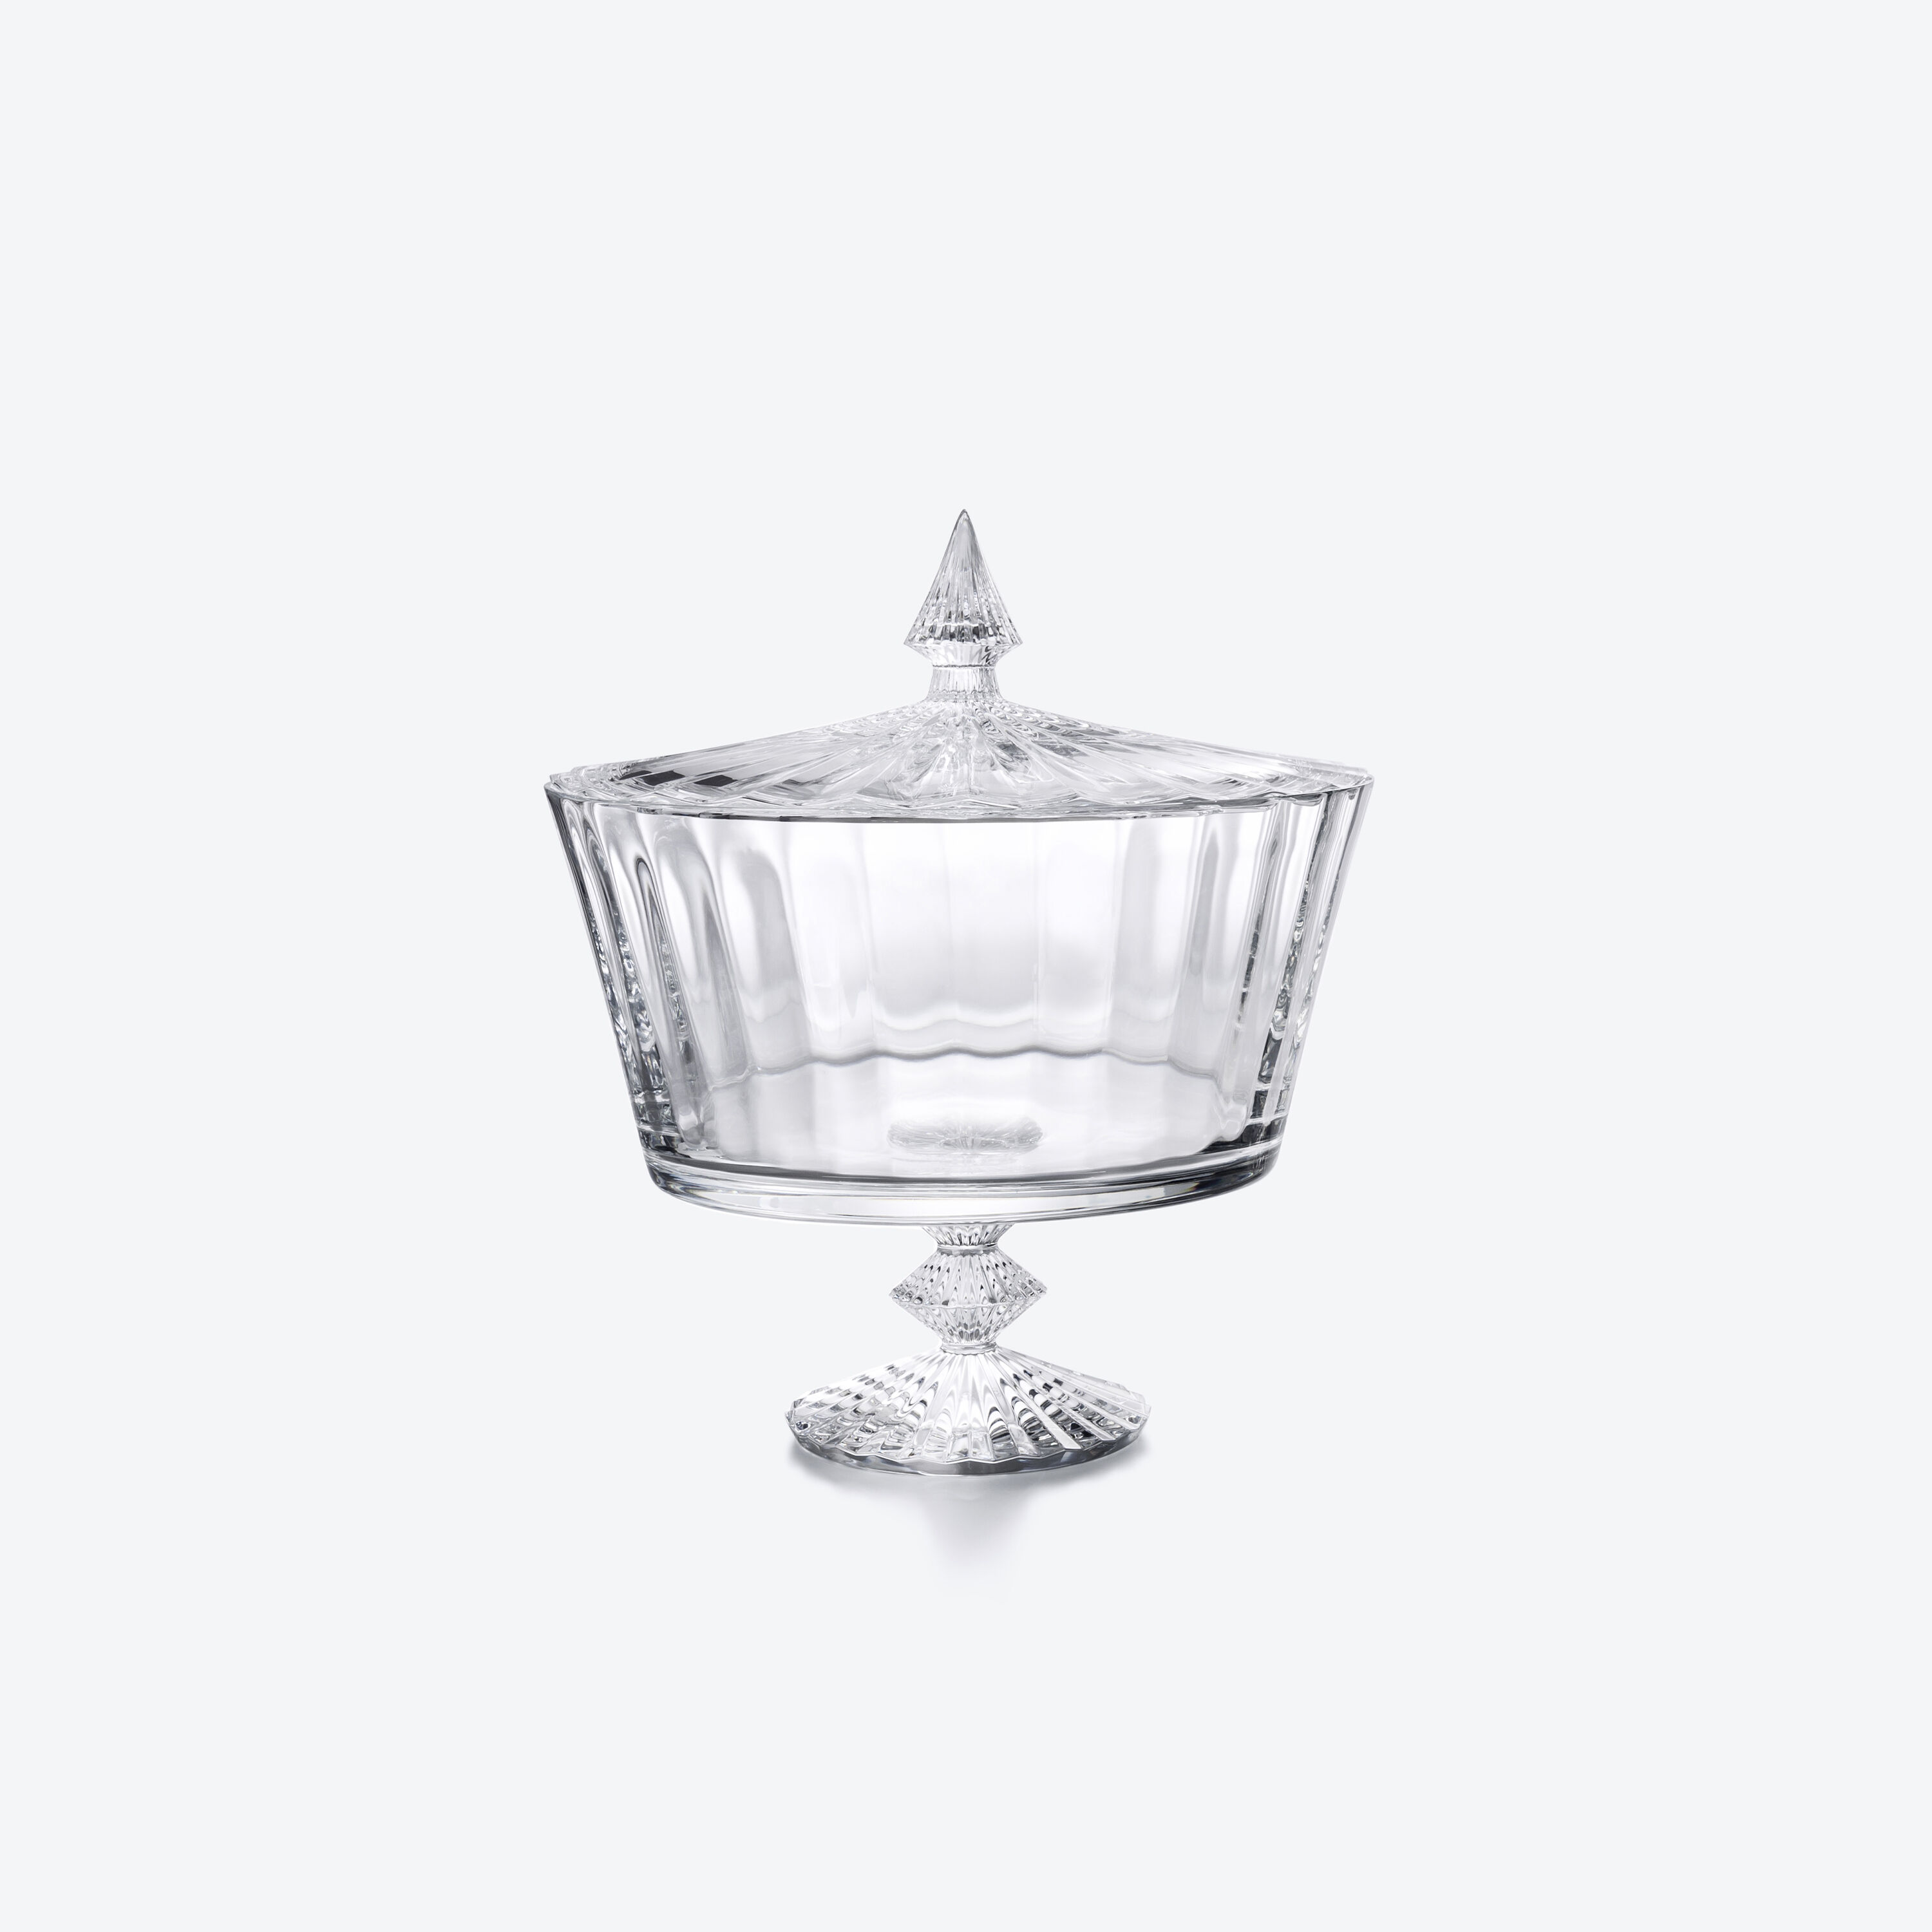 Mille Nuits Small Candy Box | Baccarat United States